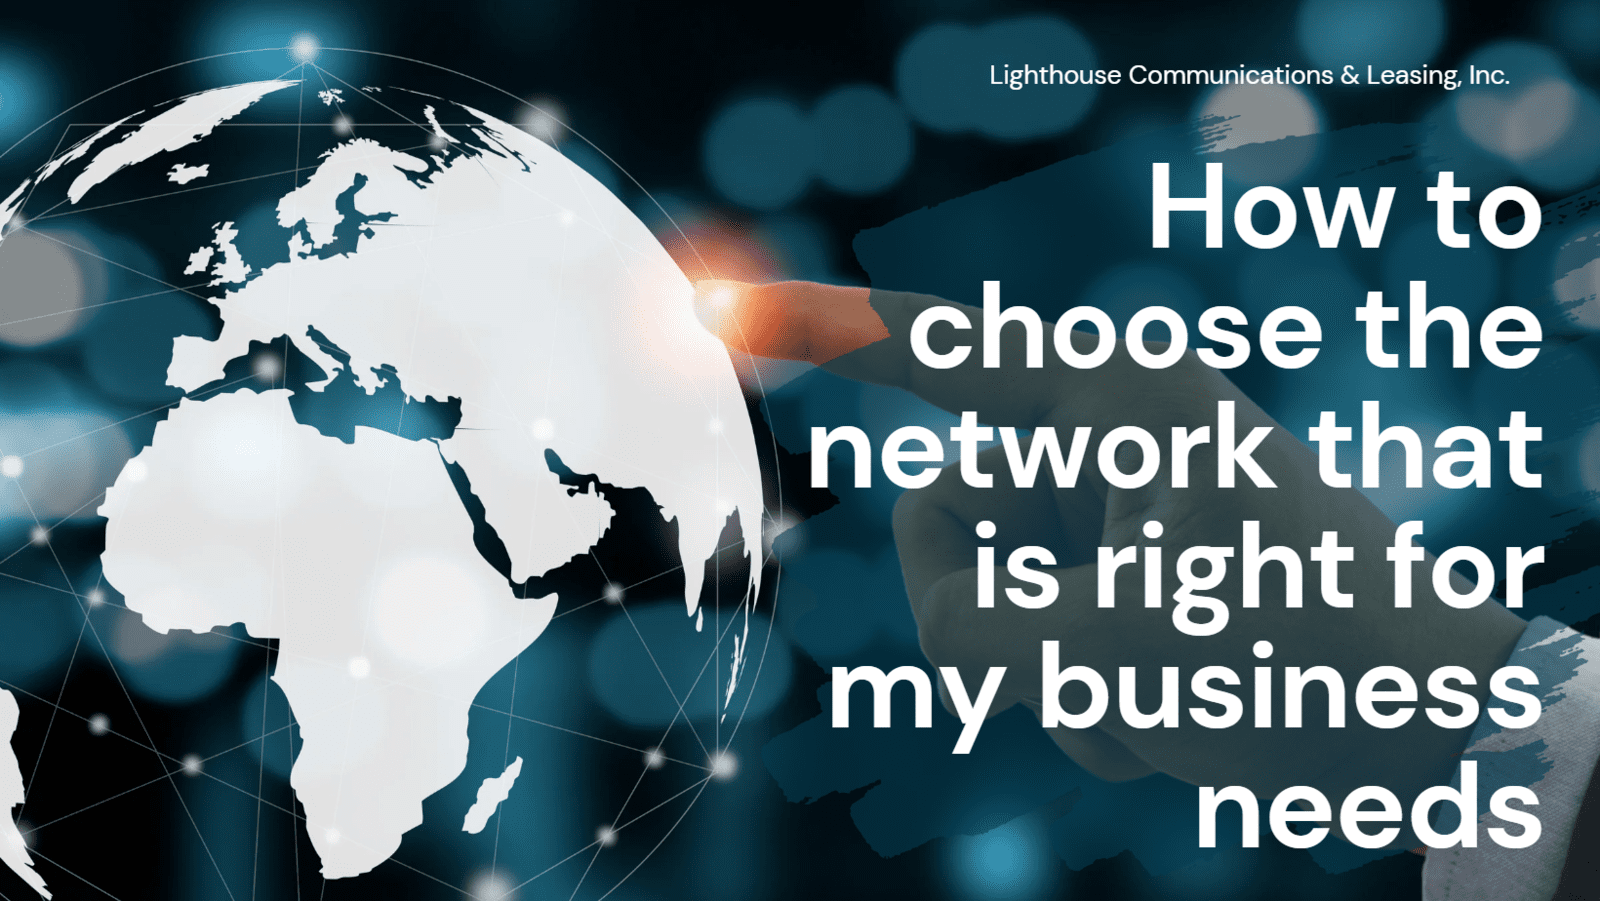 How to choose the network that is right for my business needs